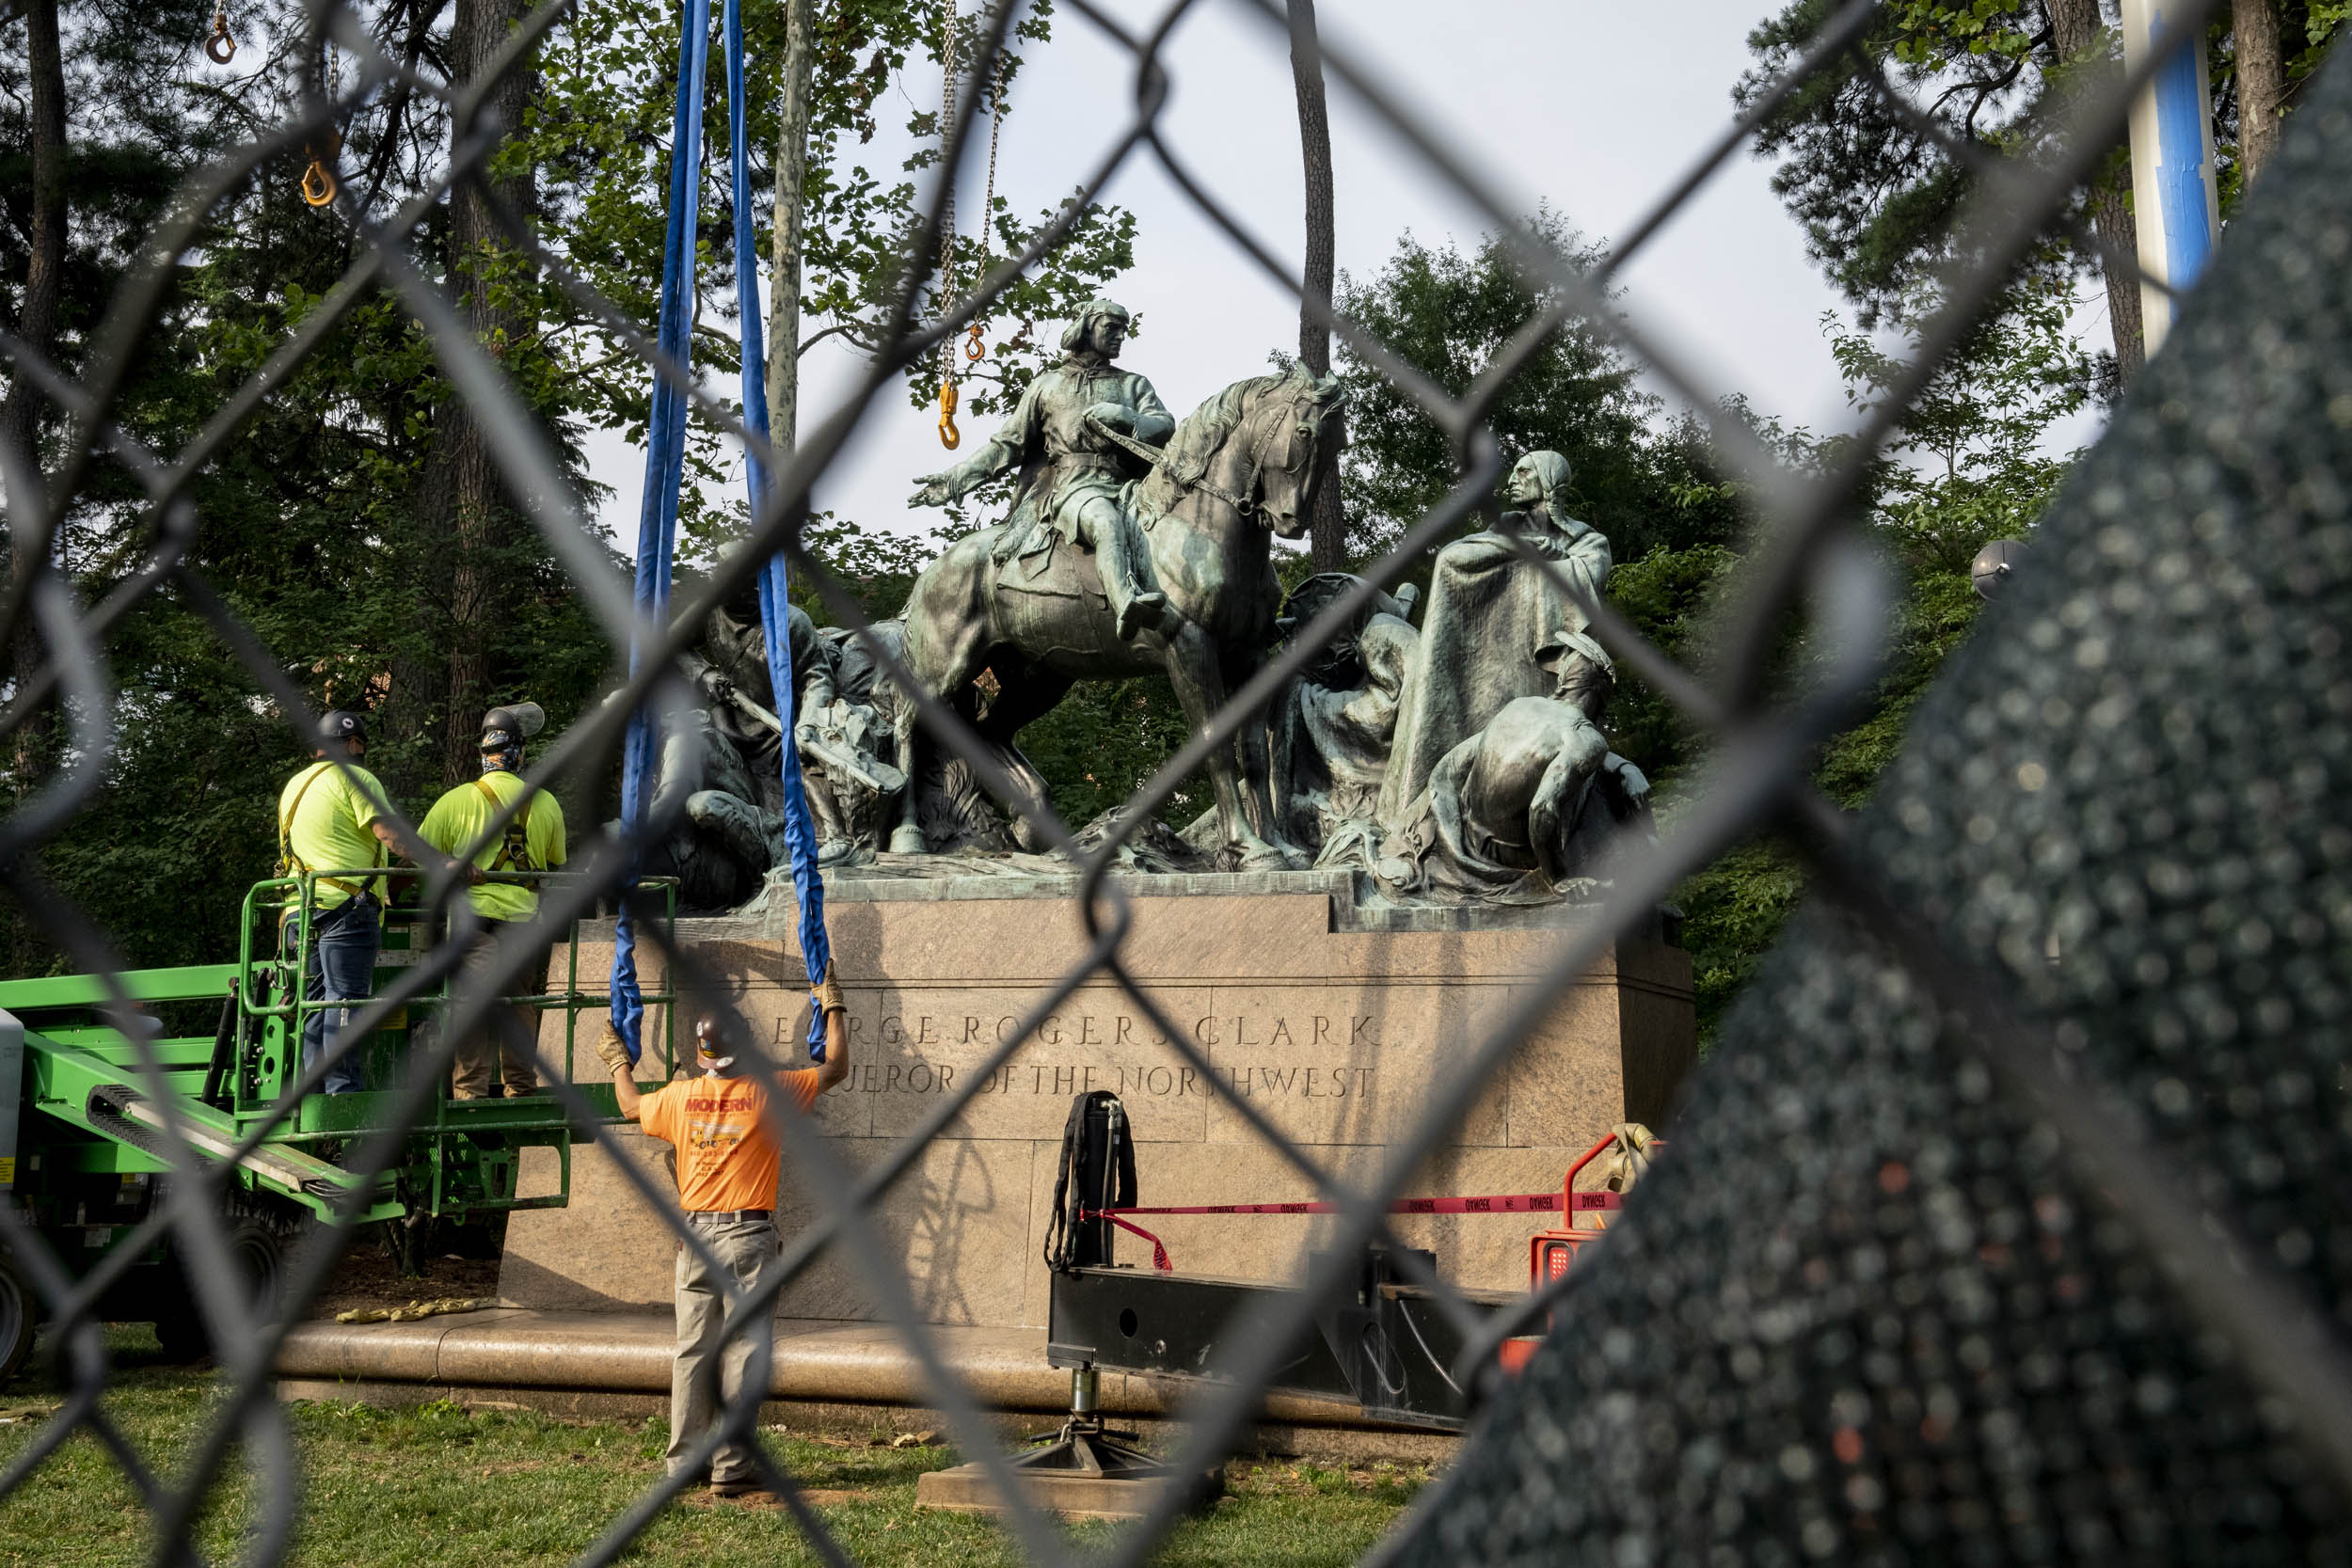 Looking at the George Rogers Clark Statue being removed through a chainlink fence